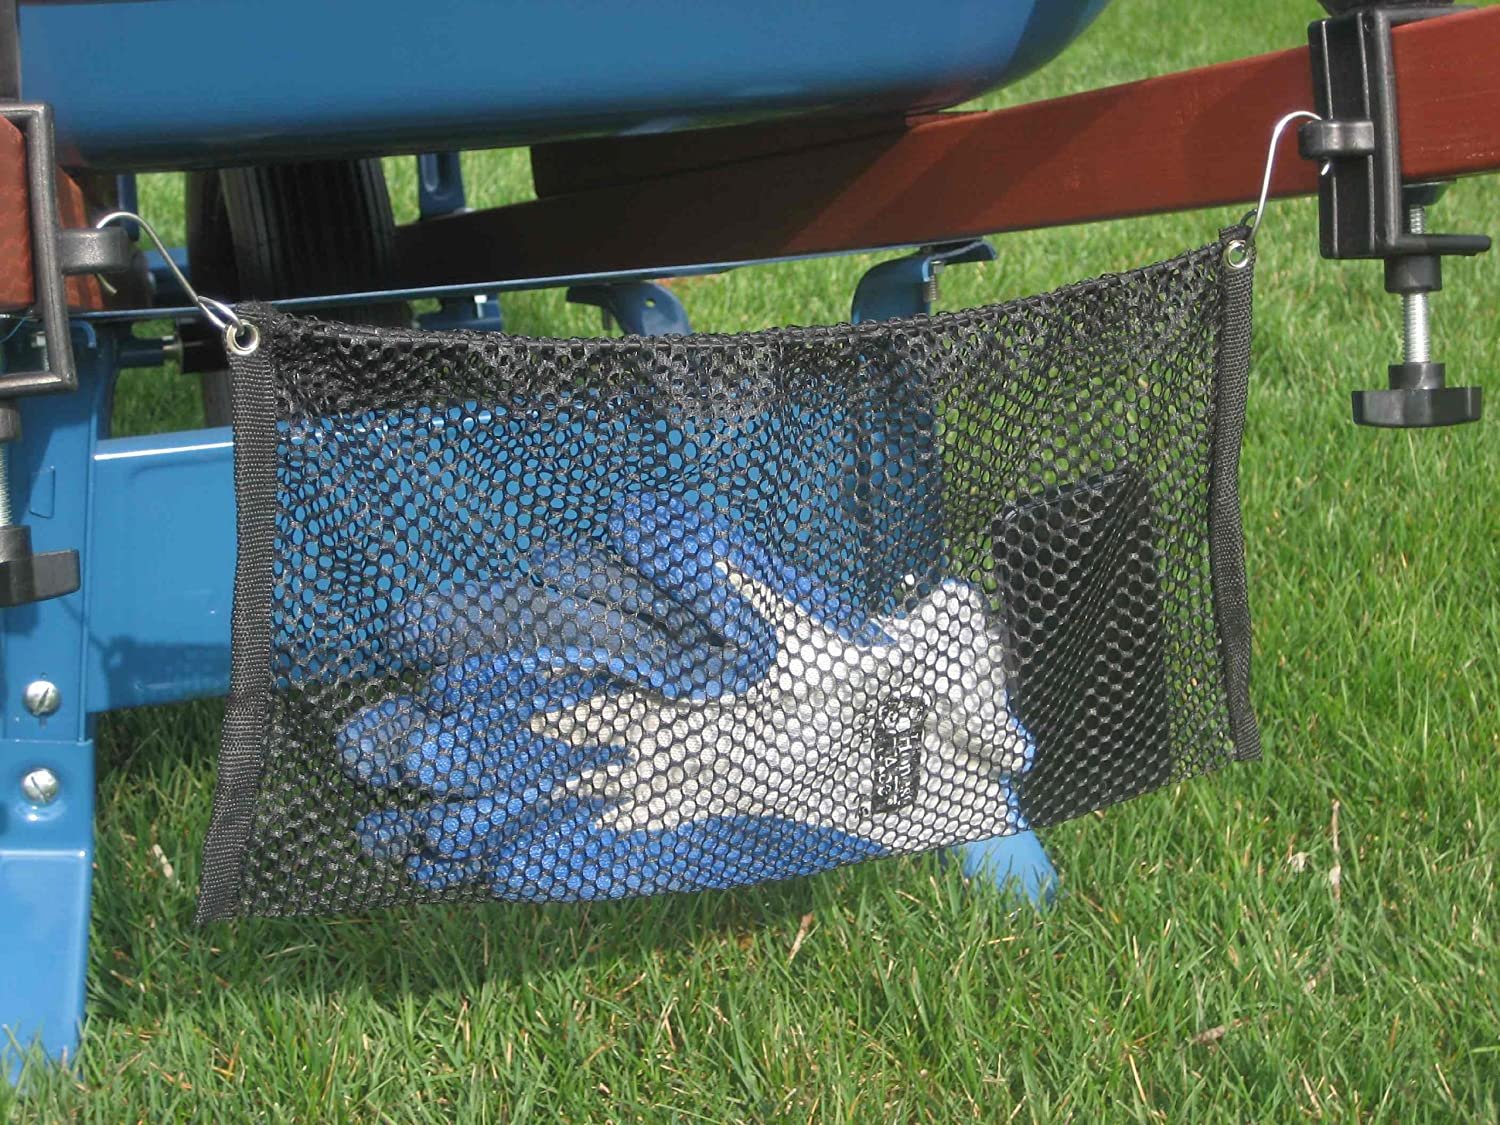 Grizzly Grip Wheelbarrow Tool Holder with Mesh Bag, Secures Tools To Wheelbarrow - image 3 of 5